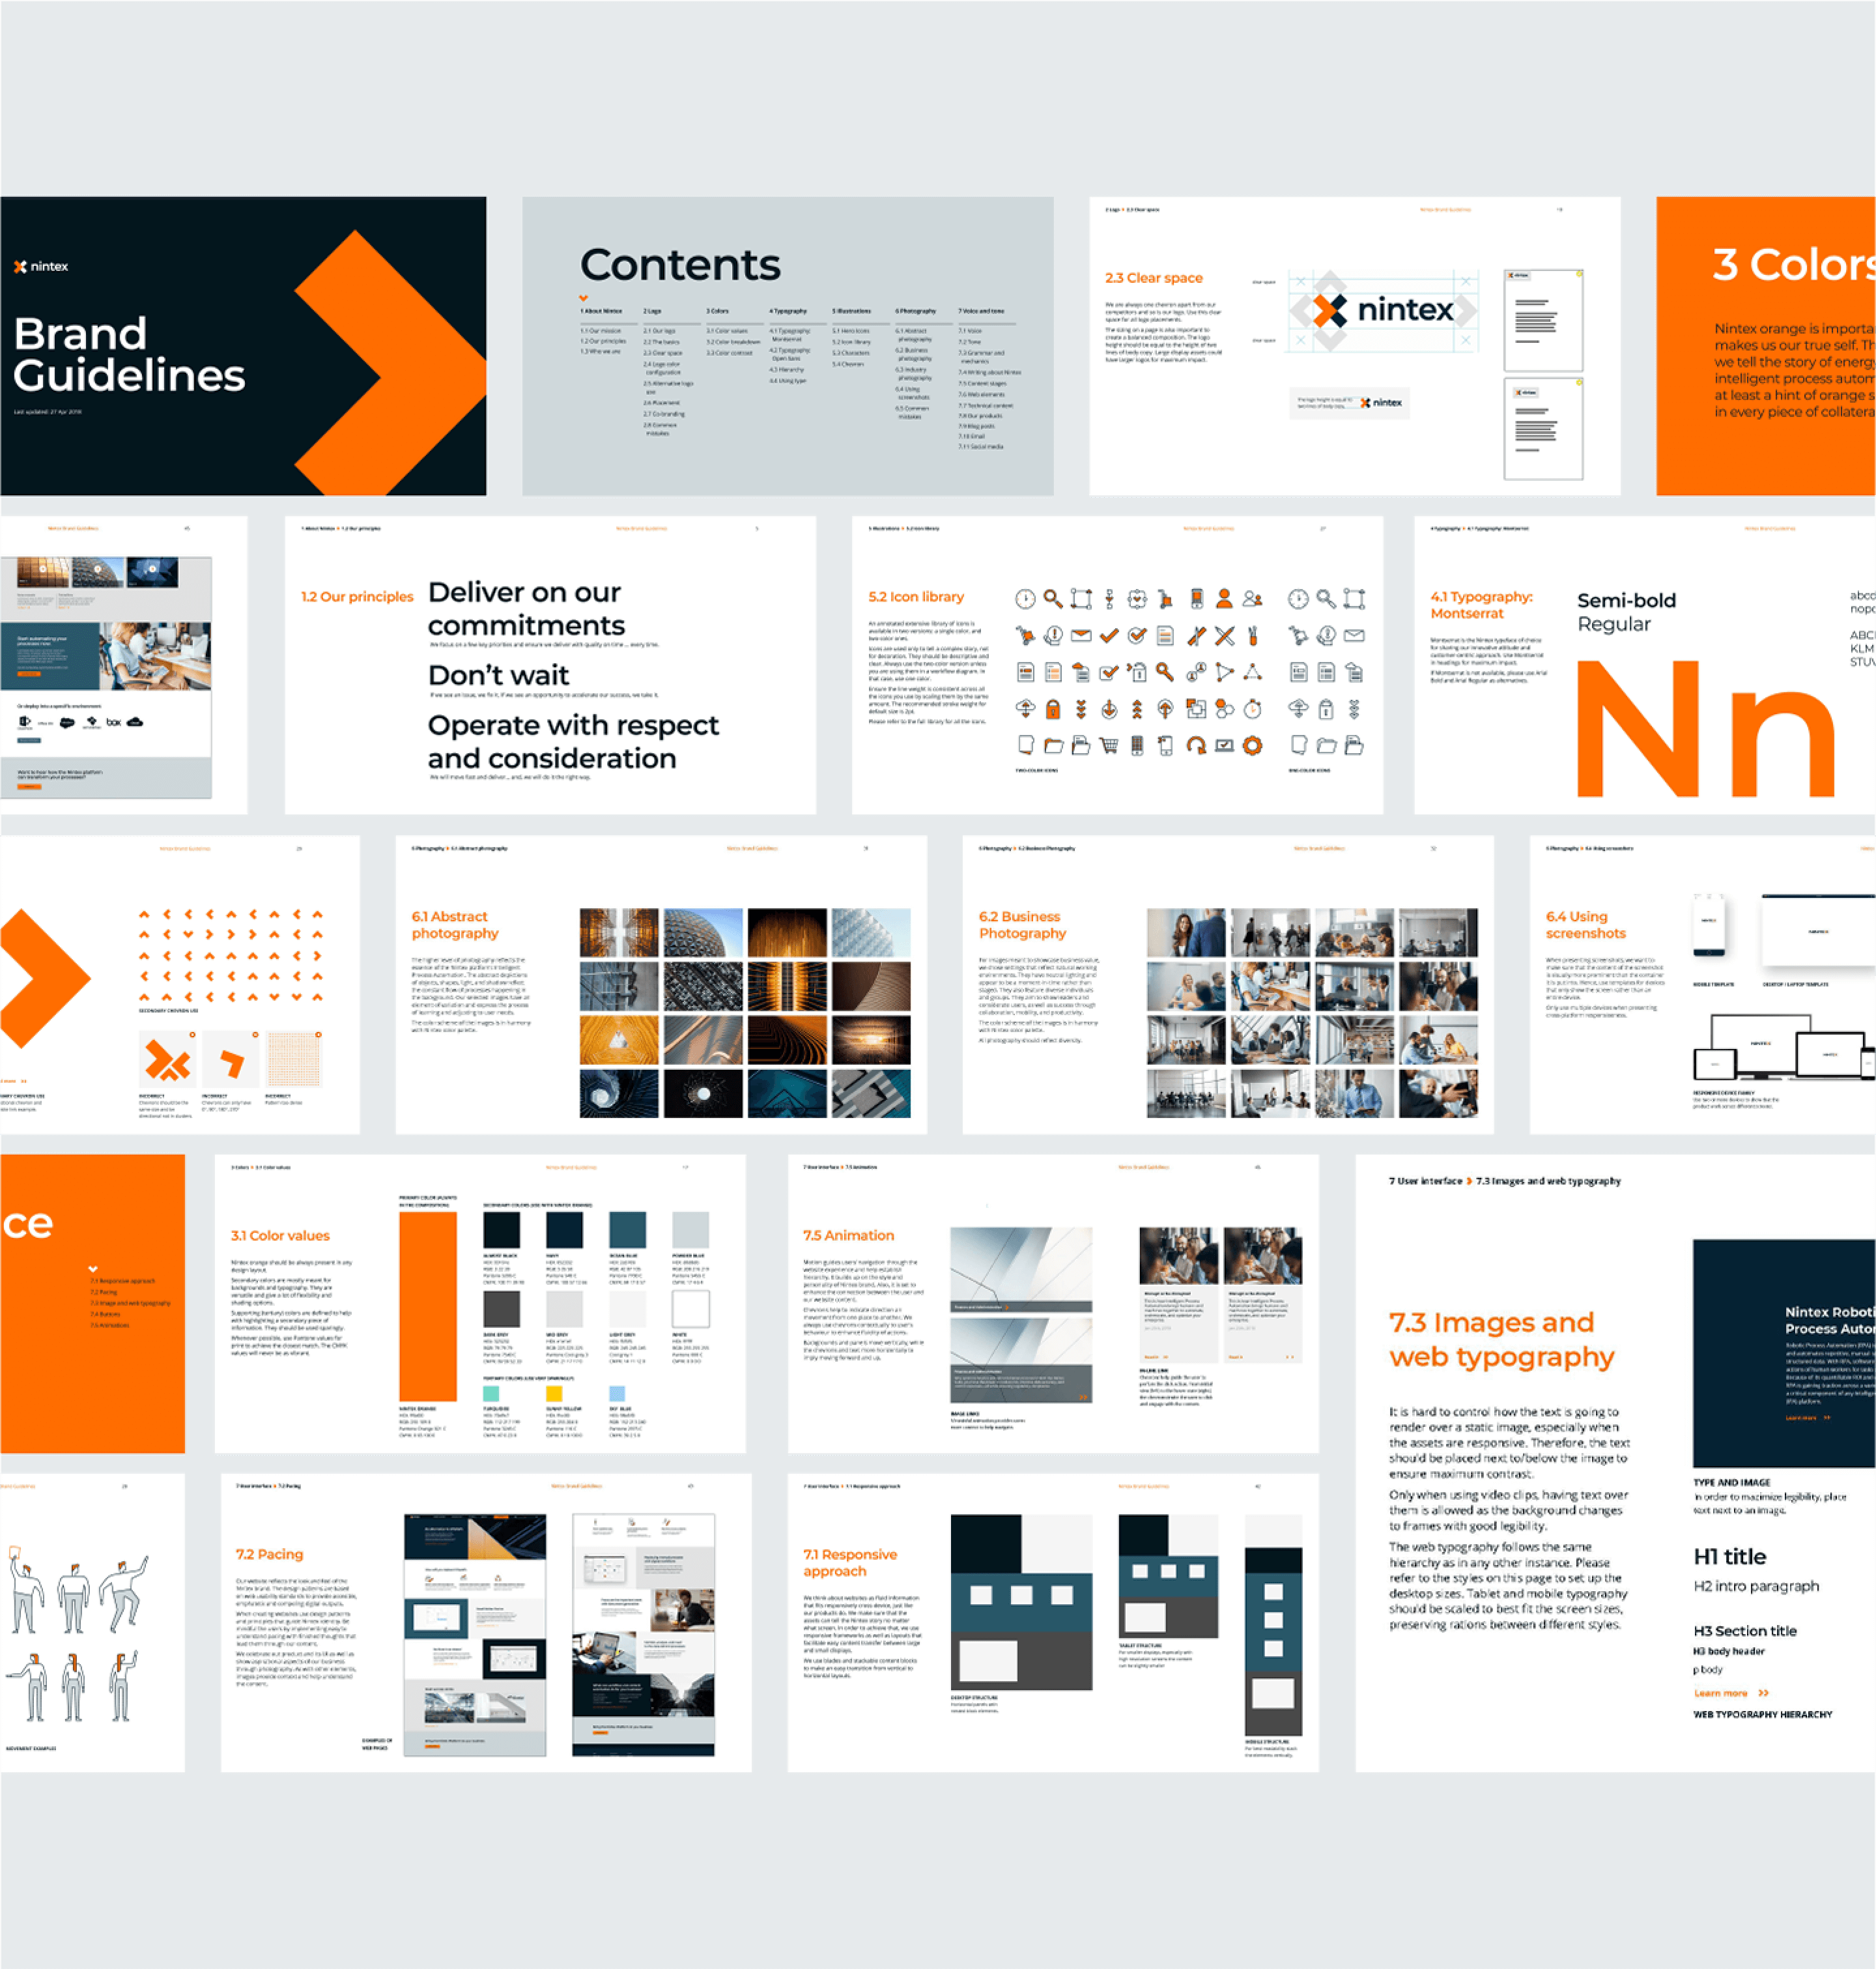 Brand guidelines defining logo, illustration, photography, colour, and typography usage, and more